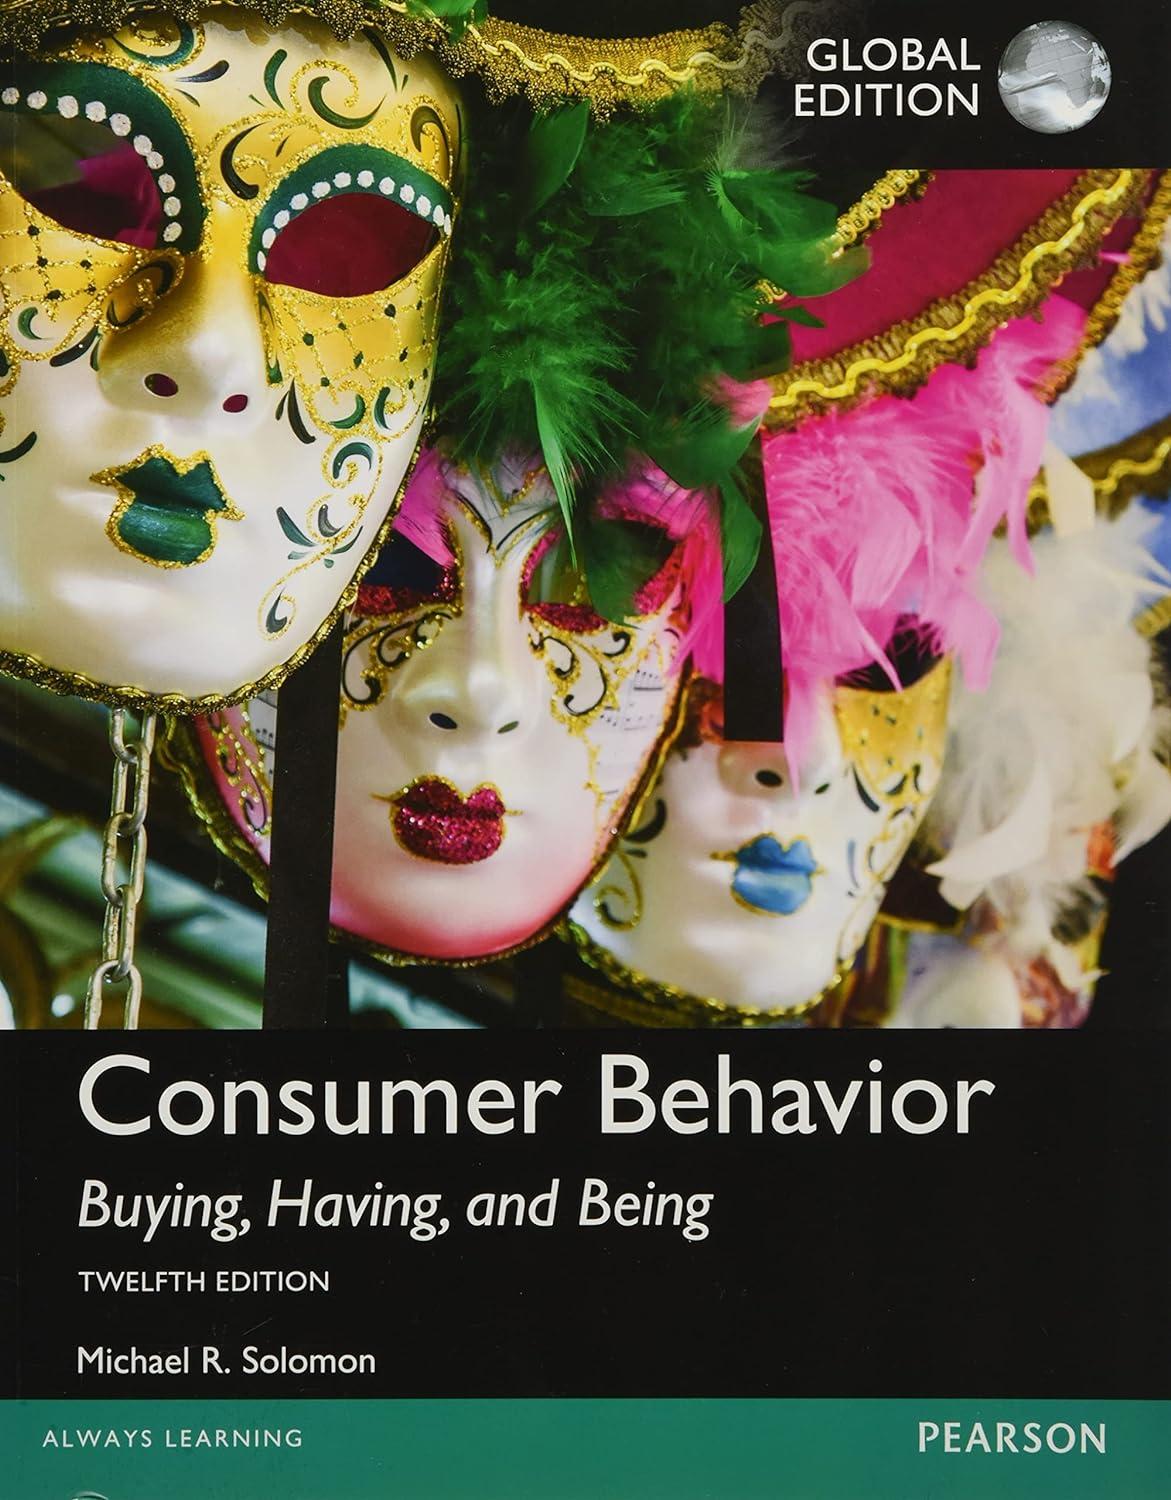 consumer behavior buying having and being 12th global edition michael r. solomon 1292153105, 9780134129938